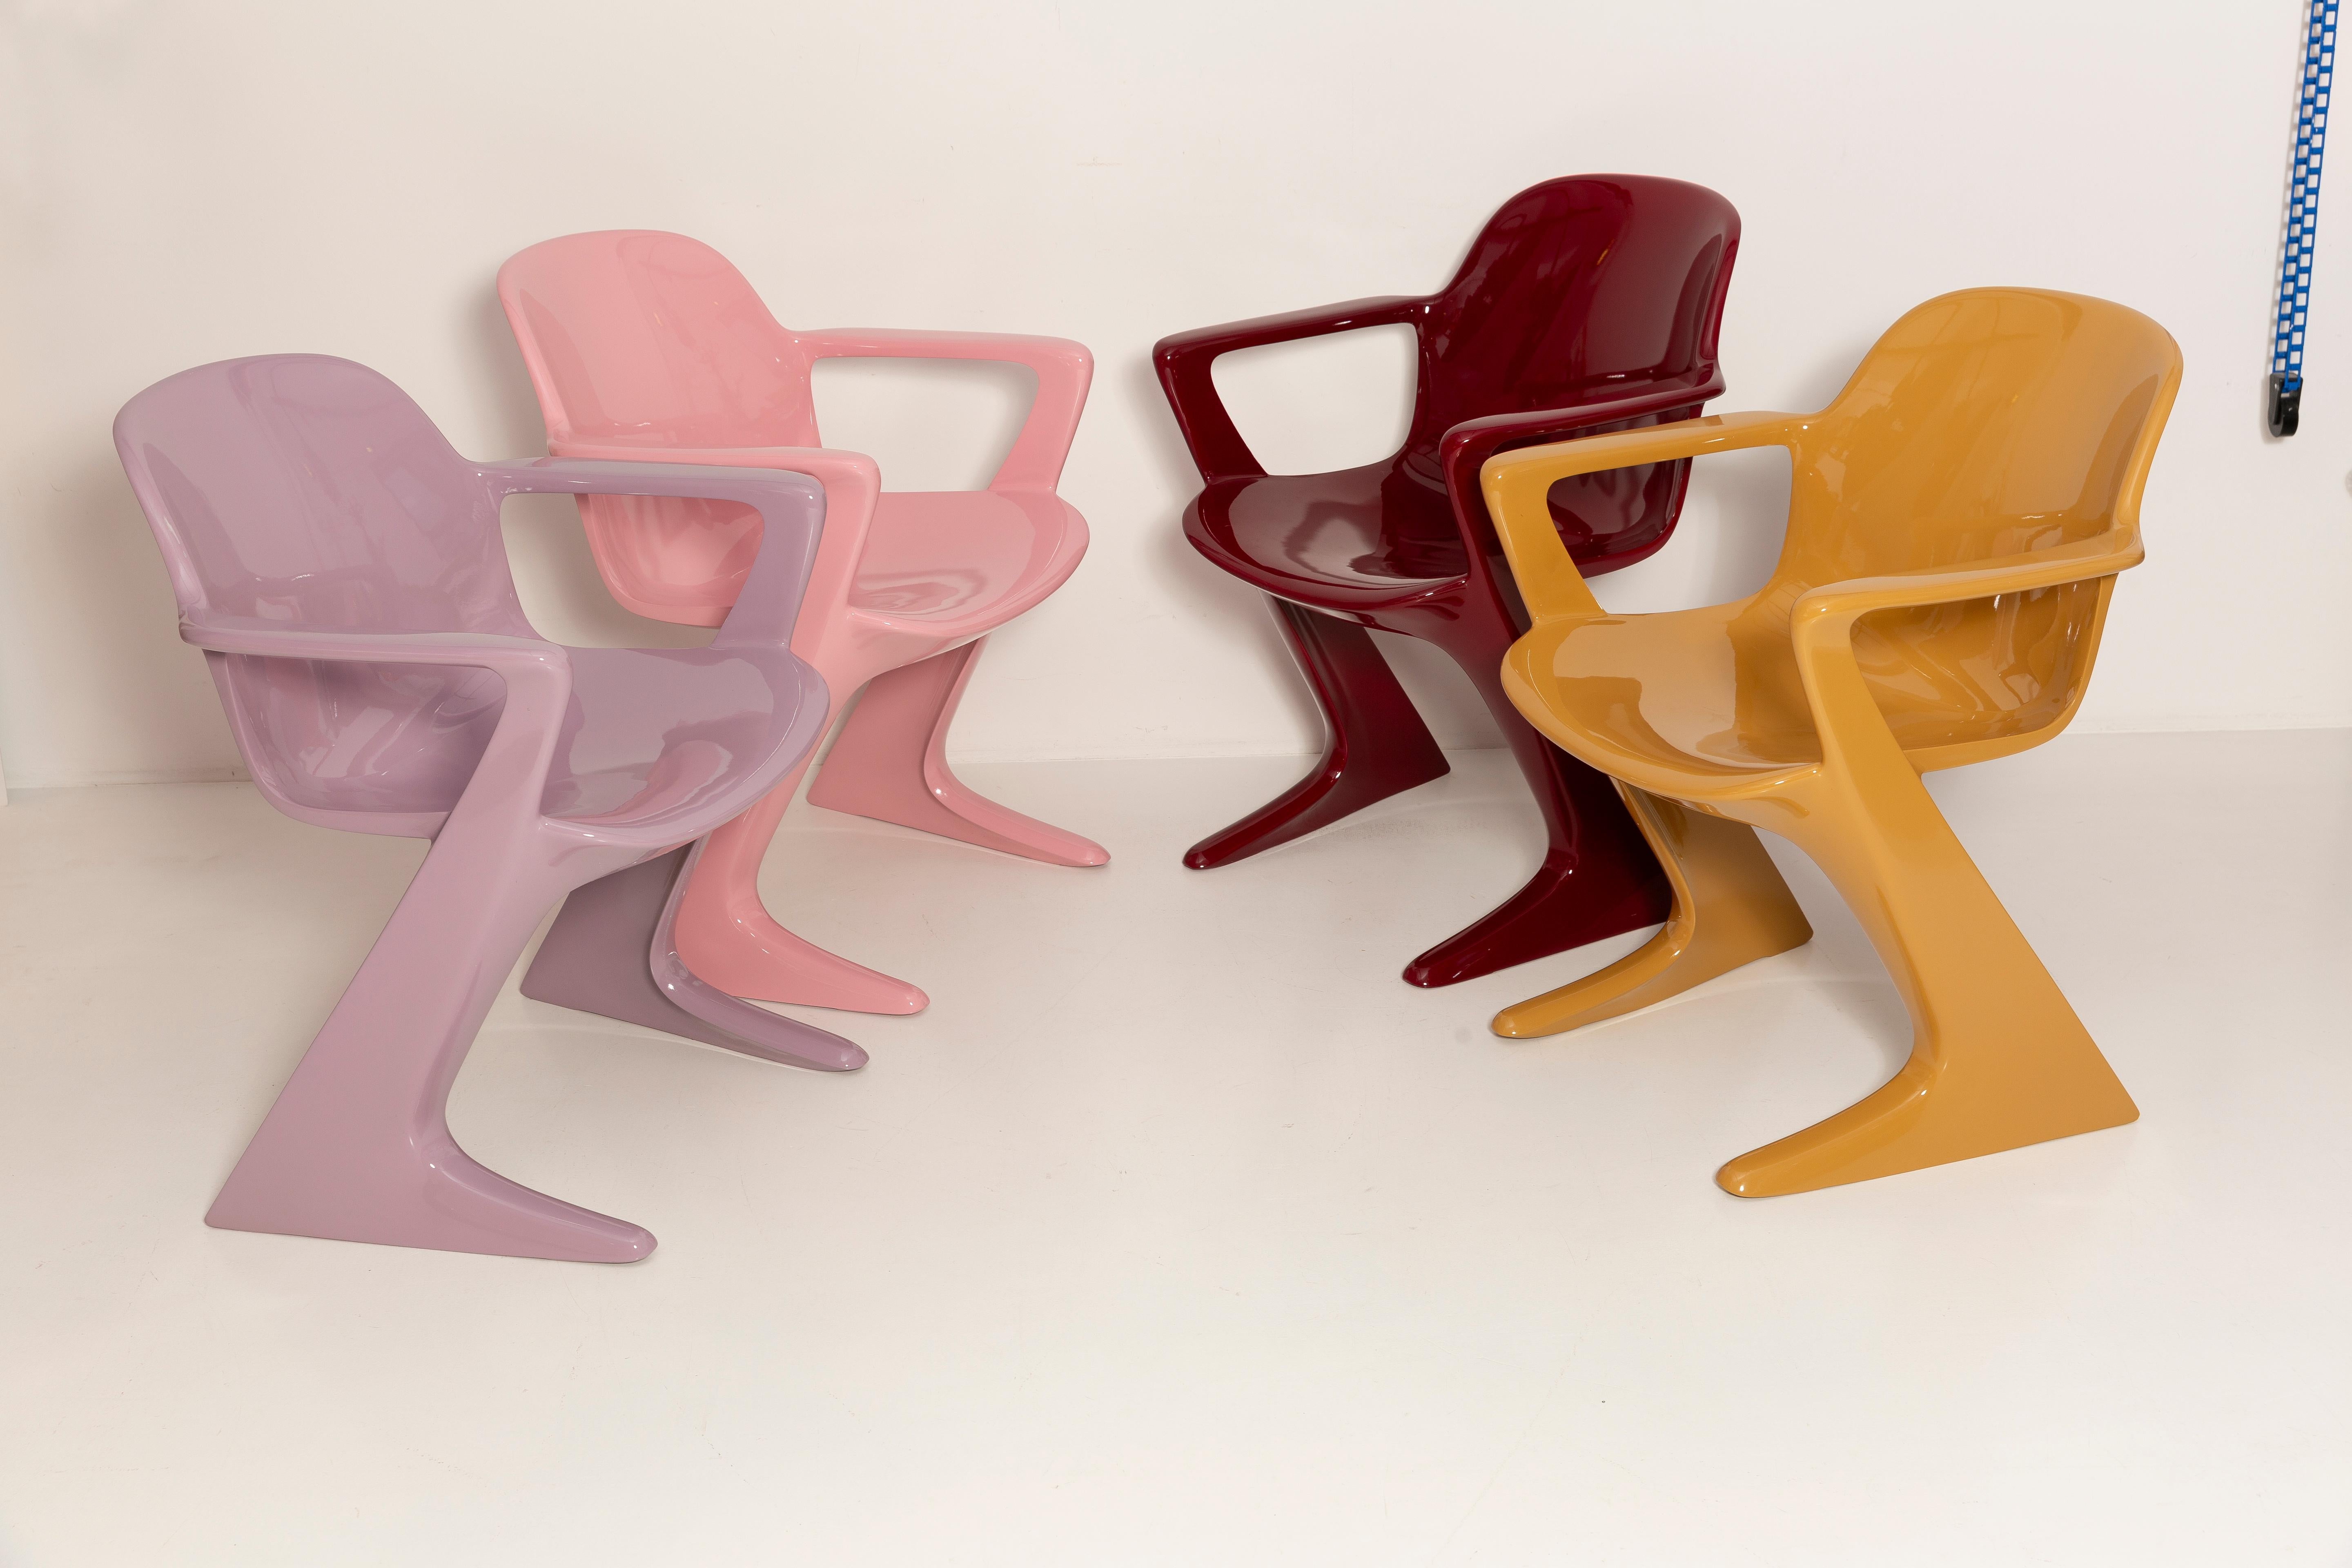 Lacquered Set of Six Mid Century Kangaroo Chairs, Ernst Moeckl, Germany, 1968 For Sale